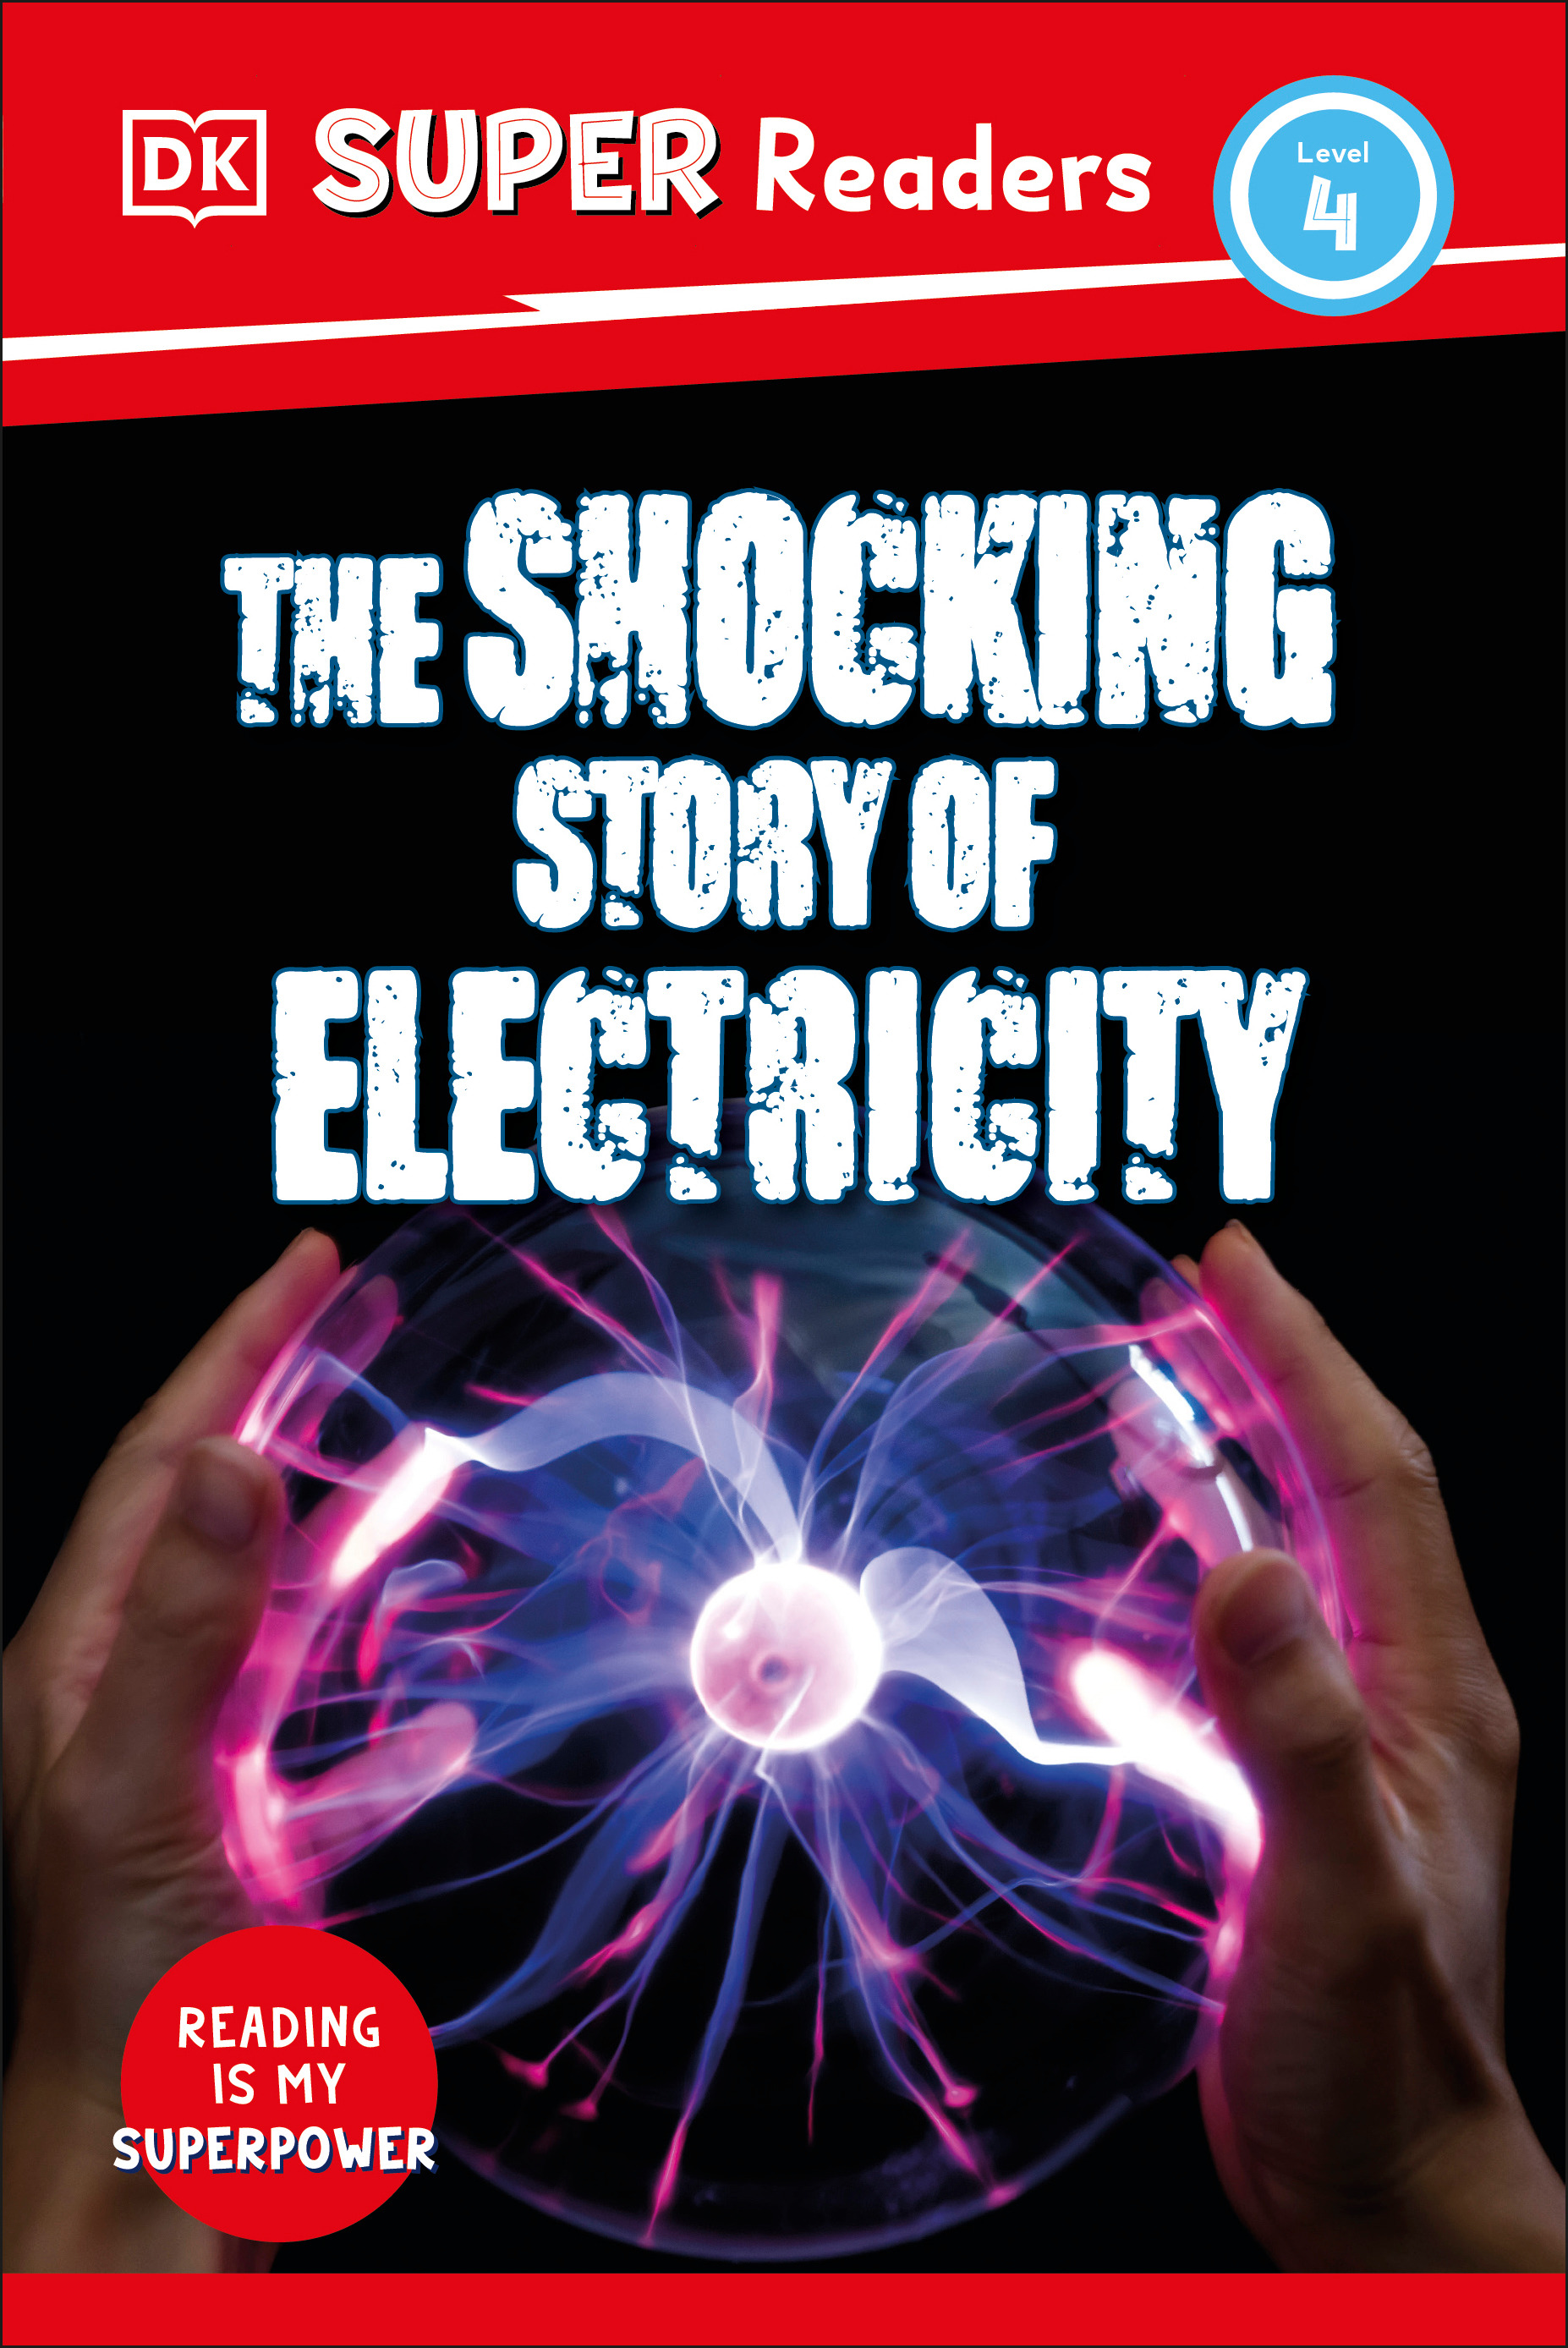 DK Super Readers Level 4 The Shocking Story of Electricity | 